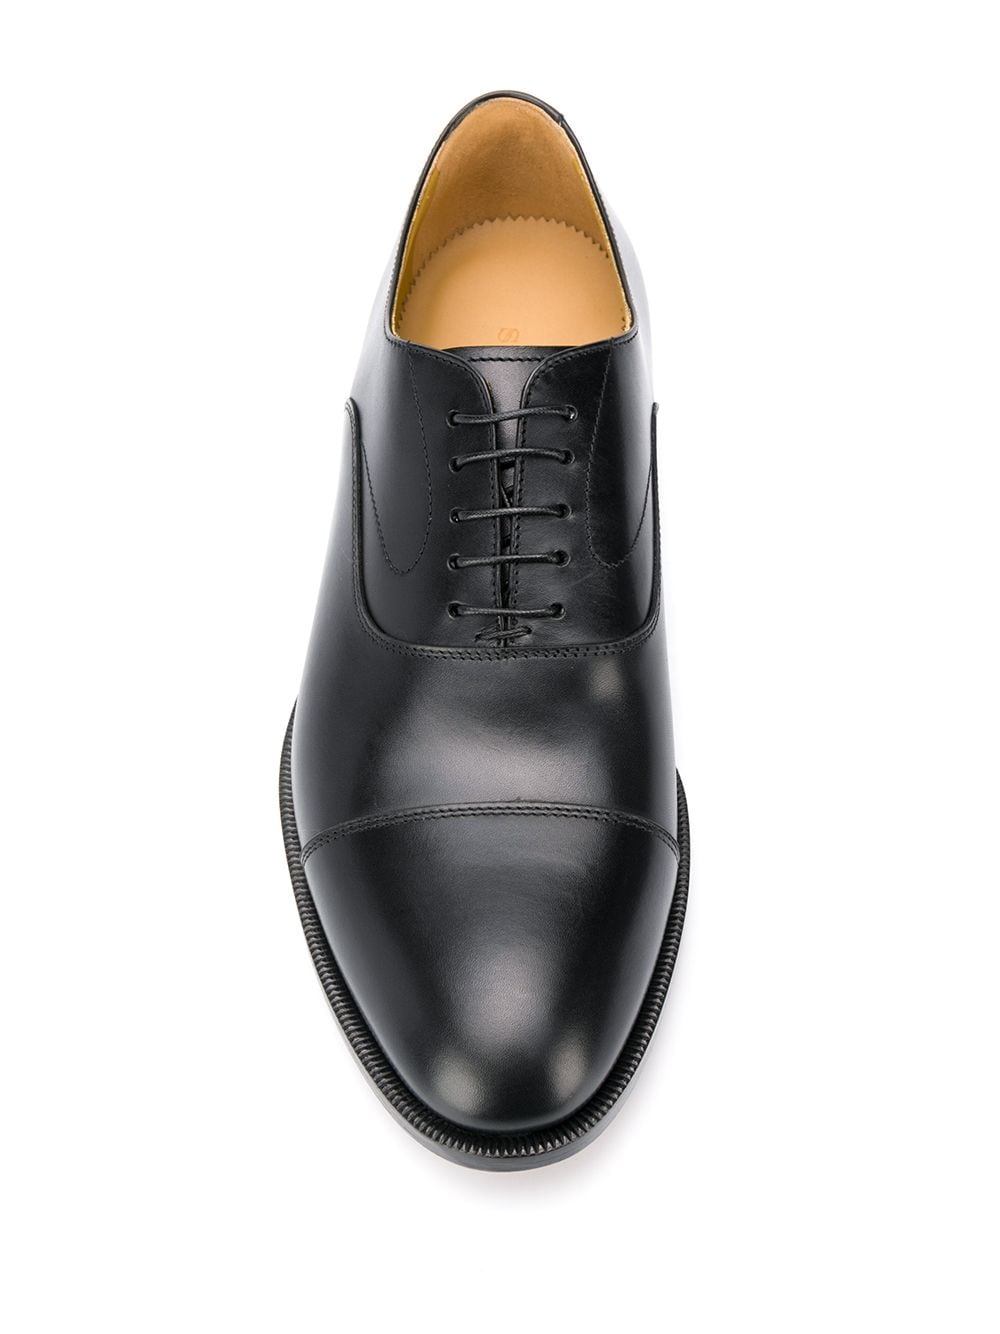 Shop Scarosso oxford shoes with Express Delivery - FARFETCH